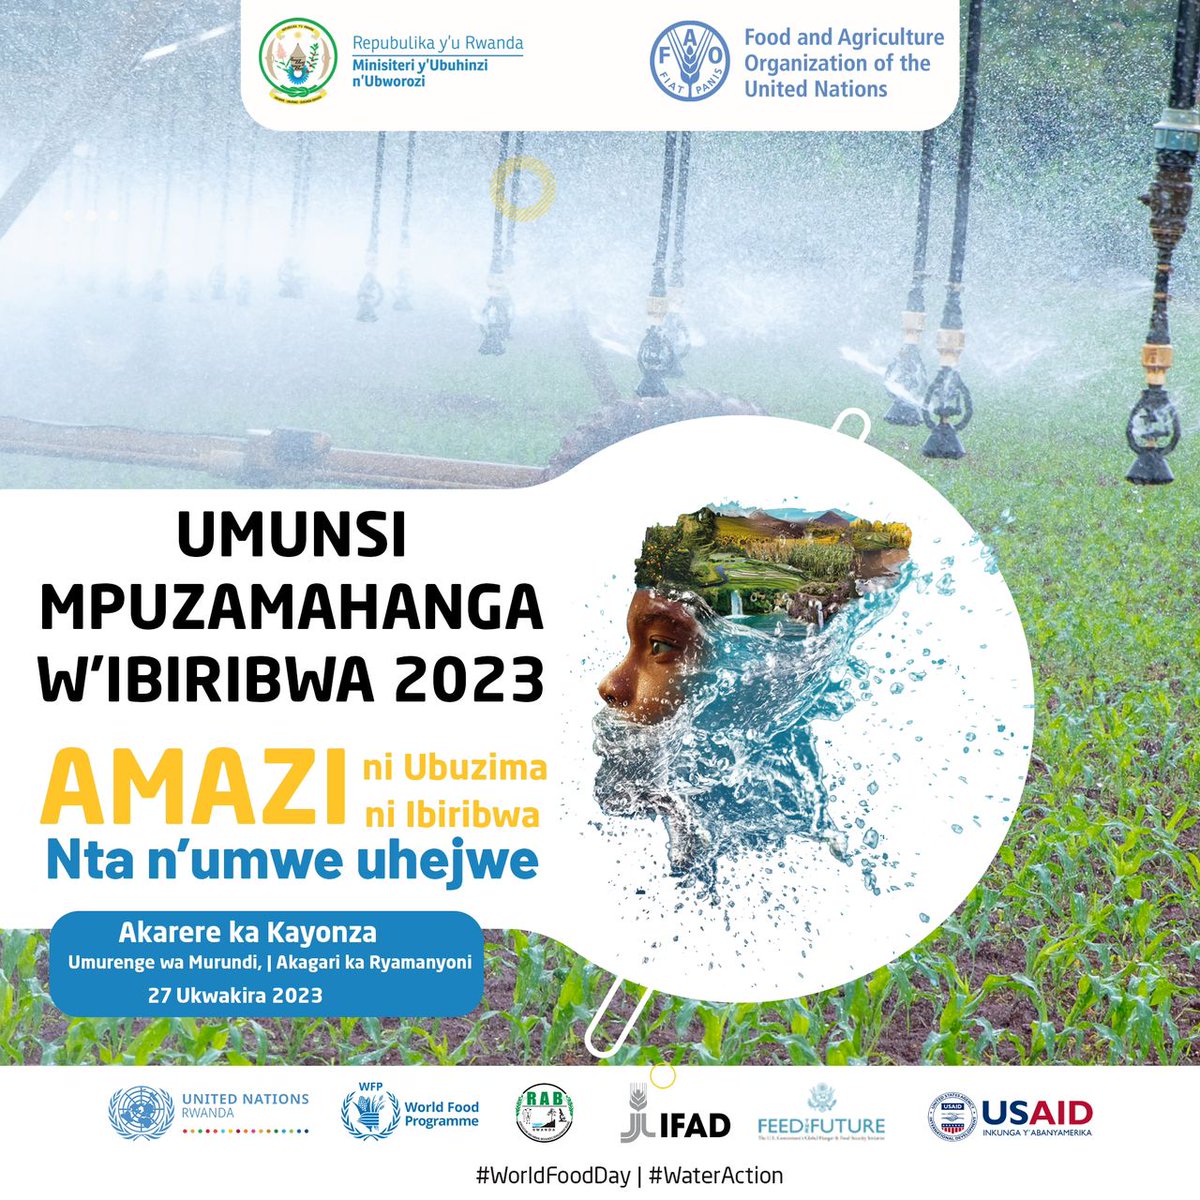 Joining partners to co-organize this year's #WorldFoodDay2023 and to take joint water action to strengthen farmers' resilience to climate shocks in order to increase productivity🥦and incomes, thereby improving food systems. Join us for the big day October 27 in @KayonzaDistrict